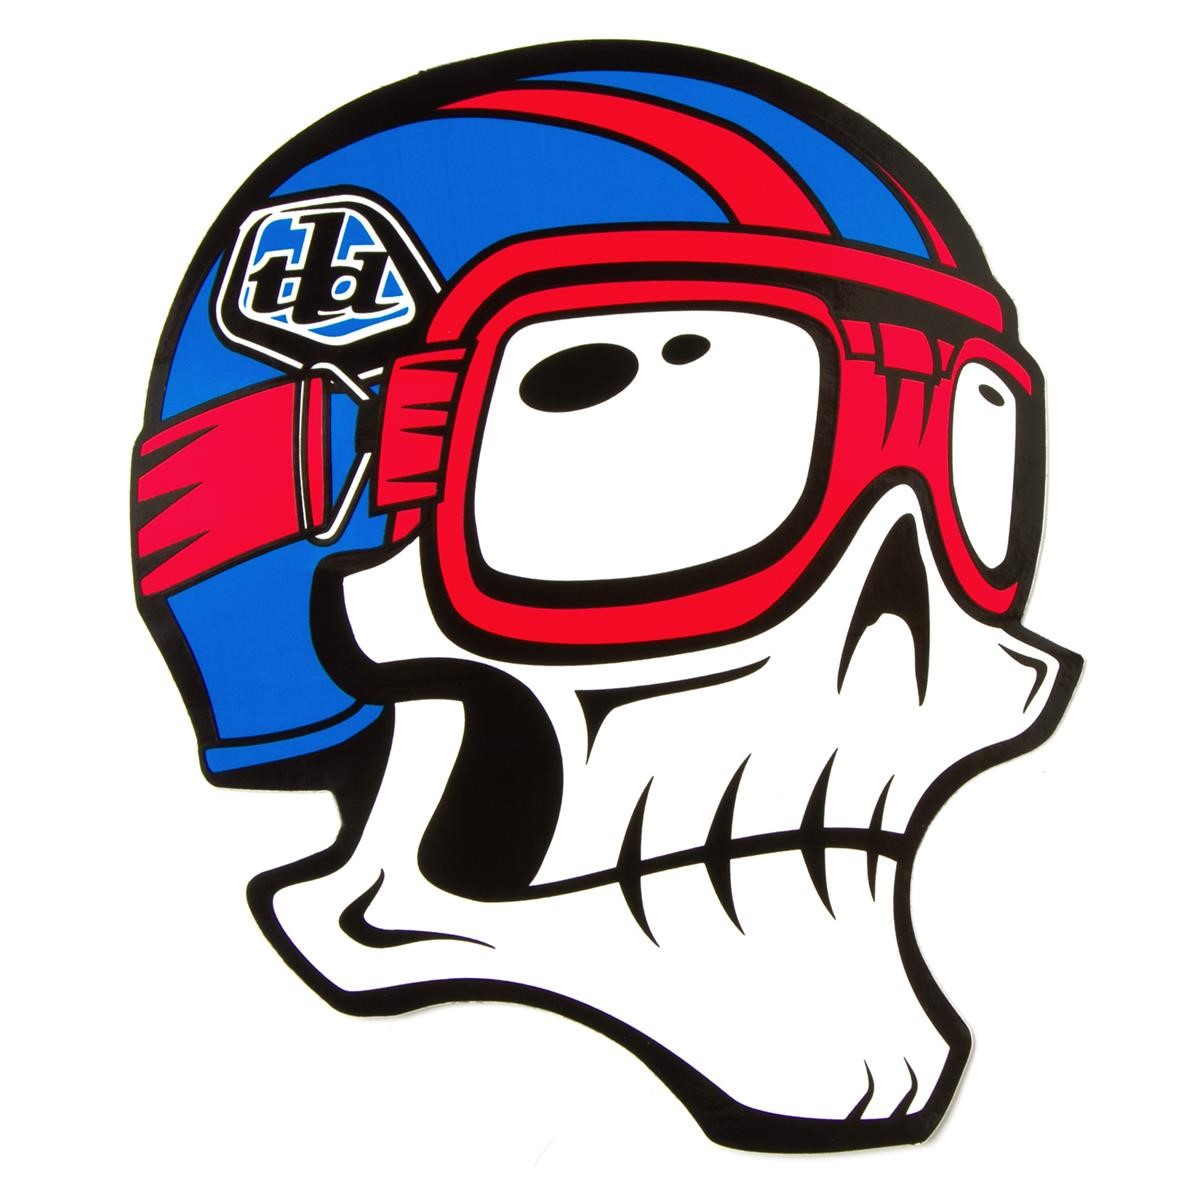 Troy Lee Designs Sticker Skully Blue/Red - 5 inches